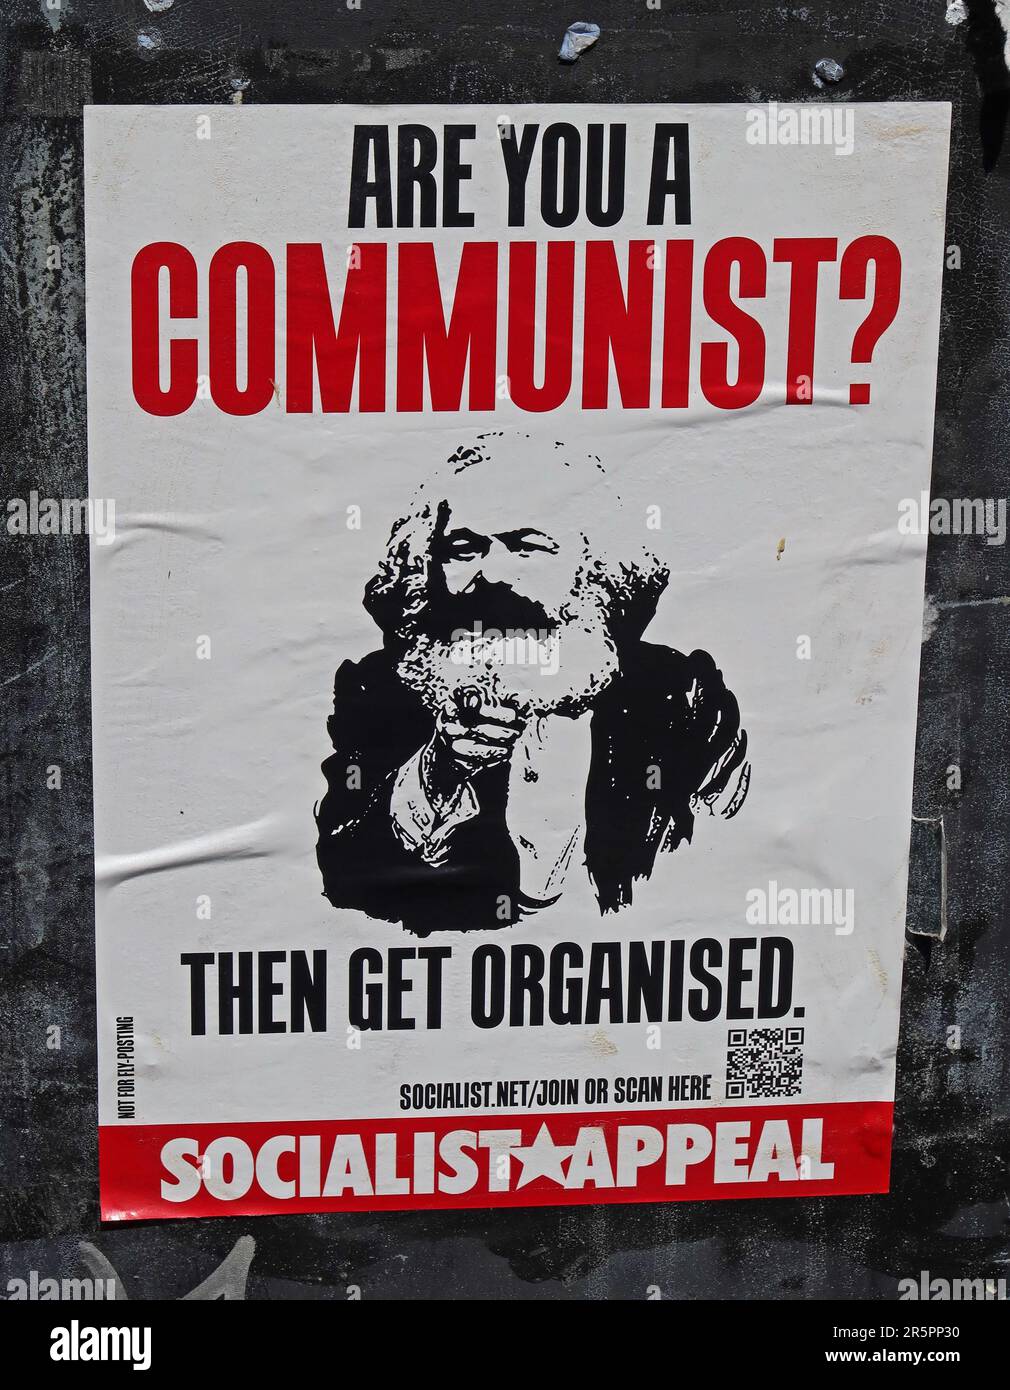 Poster with Karl Marx - Are you a communist? Then get organised, socialist appeal - poster in Lancaster, Lancs, England, UK Stock Photo